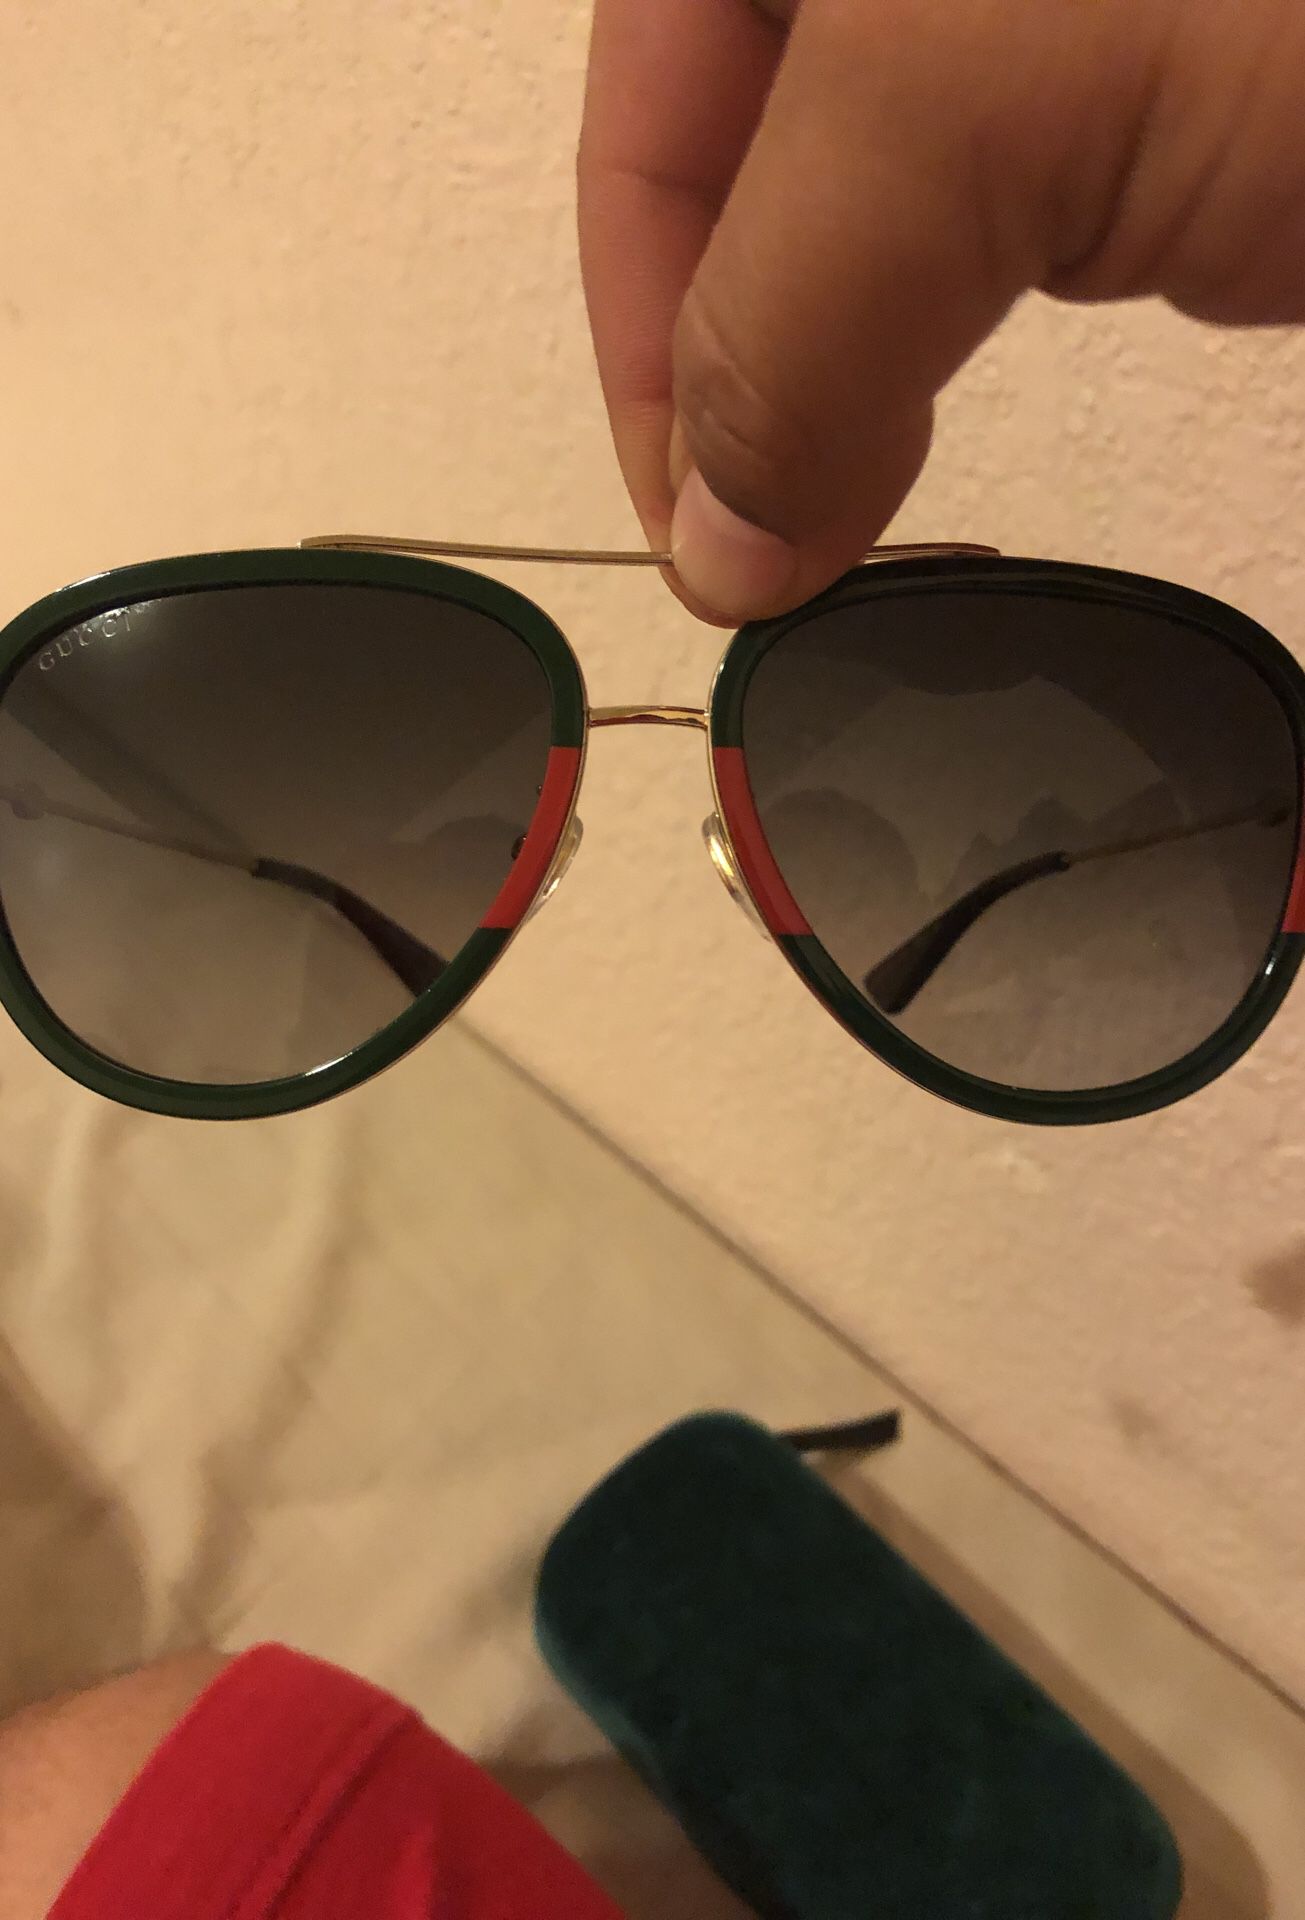 Gucci sunglasses 100% Auténtic whit box and bag I sell or exchange for Versace glasses